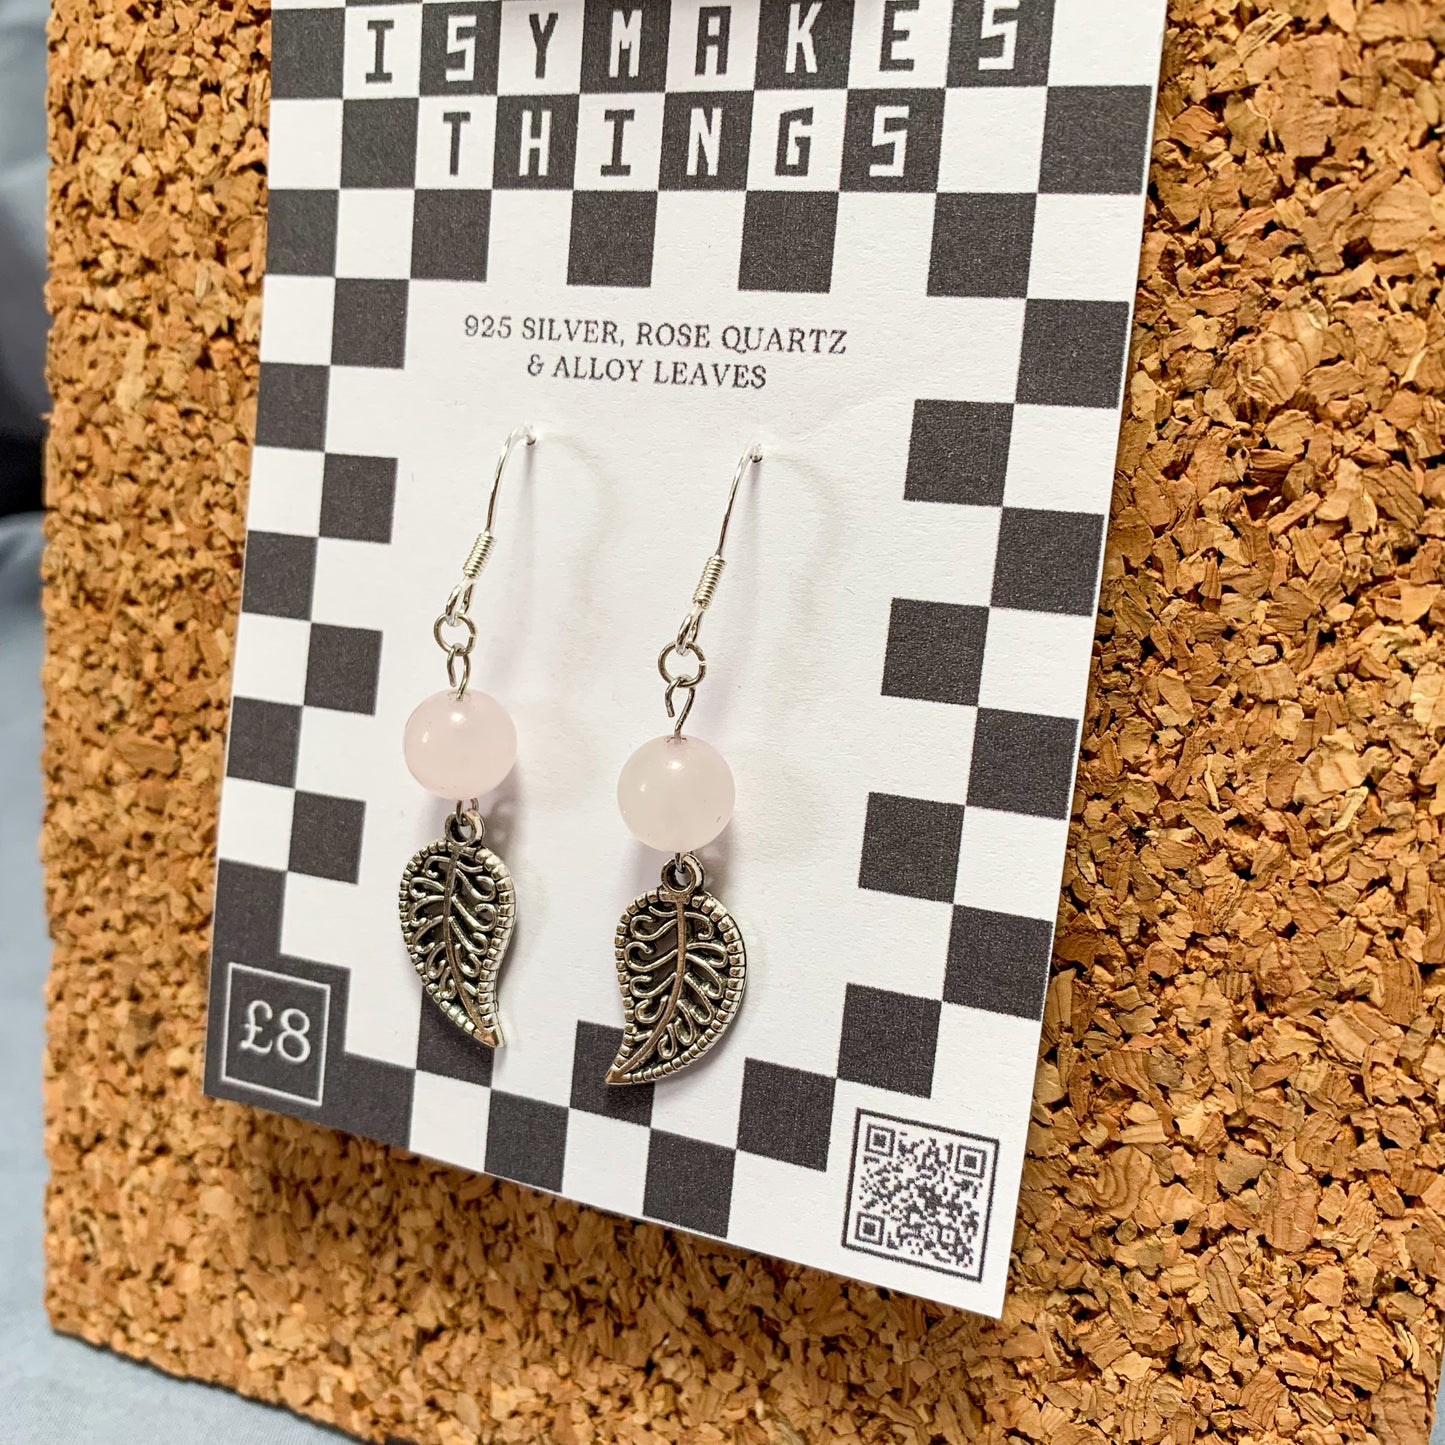 Rose quartz bead and leaf charm earrings on a checkerboard backing pegged to a corkboard against a blue background